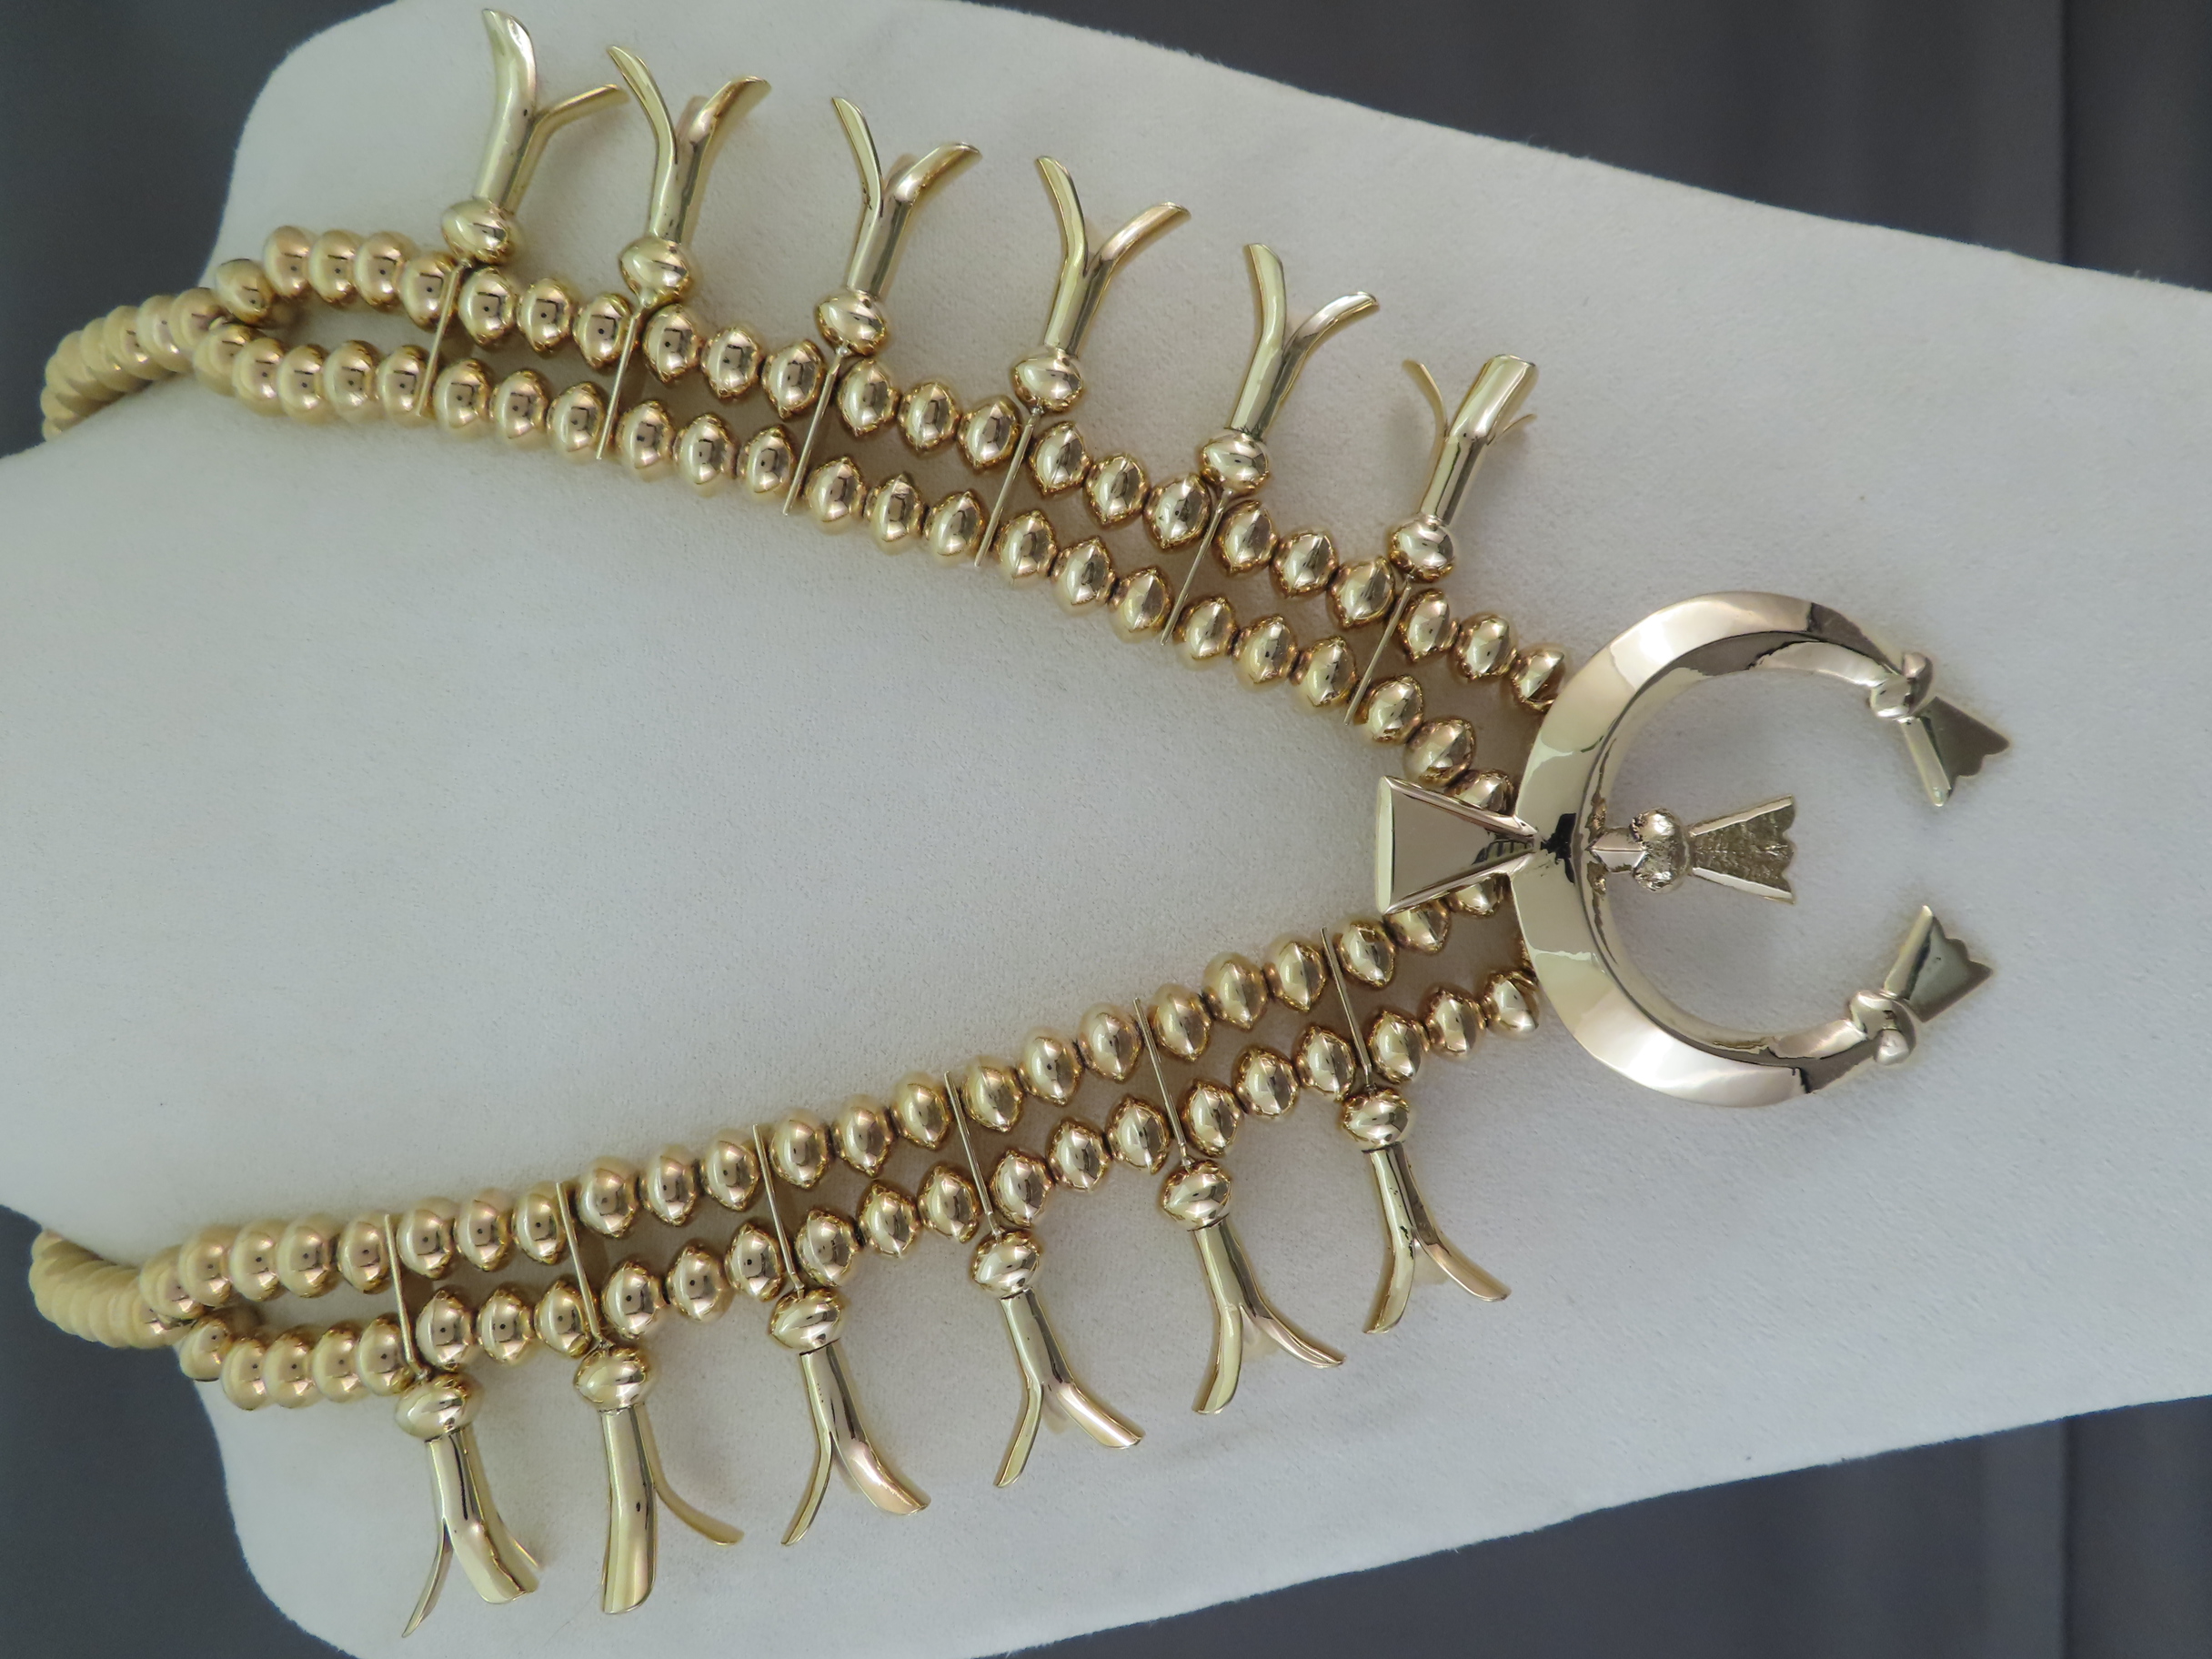 14kt Gold Squash Blossom Necklace by Native American (Navajo) jewelry artist, Harrison Jim FOR SALE $55,000-